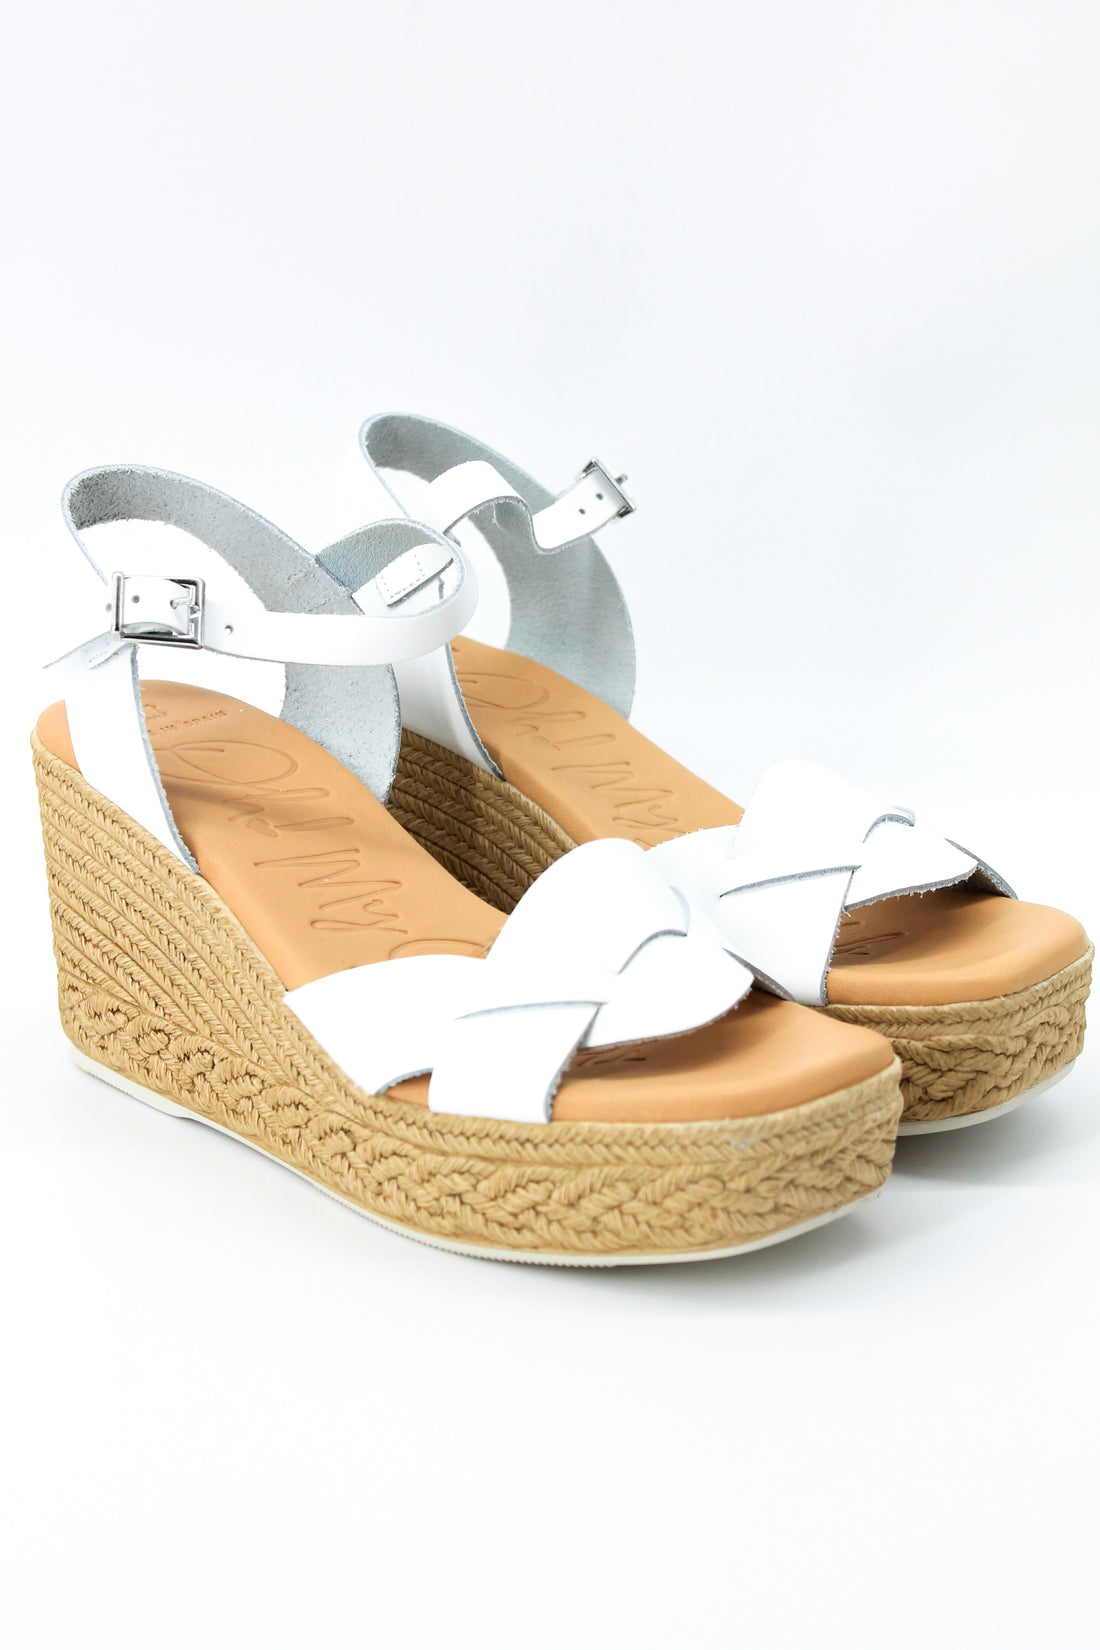 Oh My Sandals 5226 White